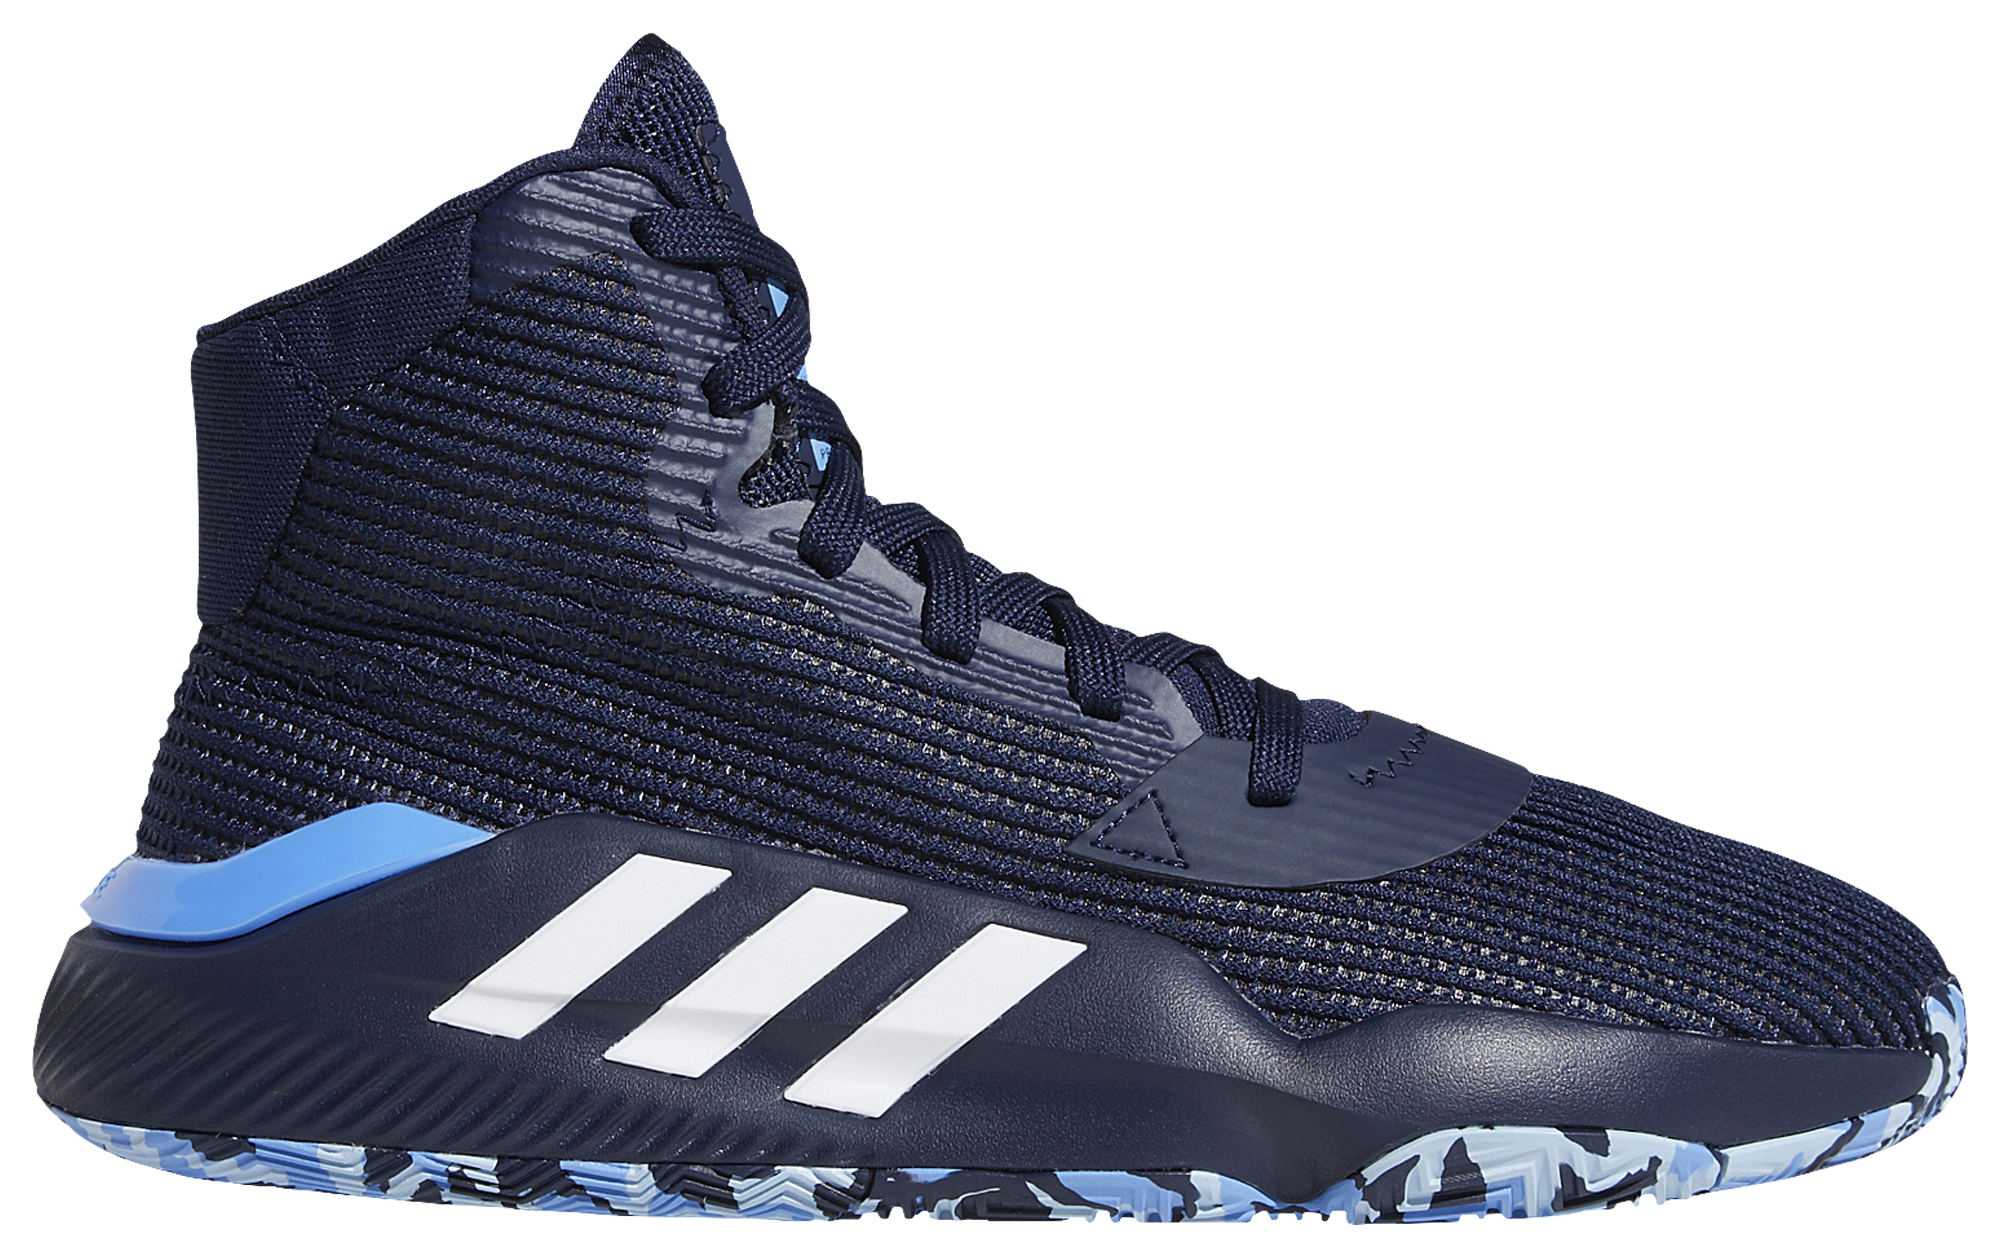 adidas basketball shoes blue and white